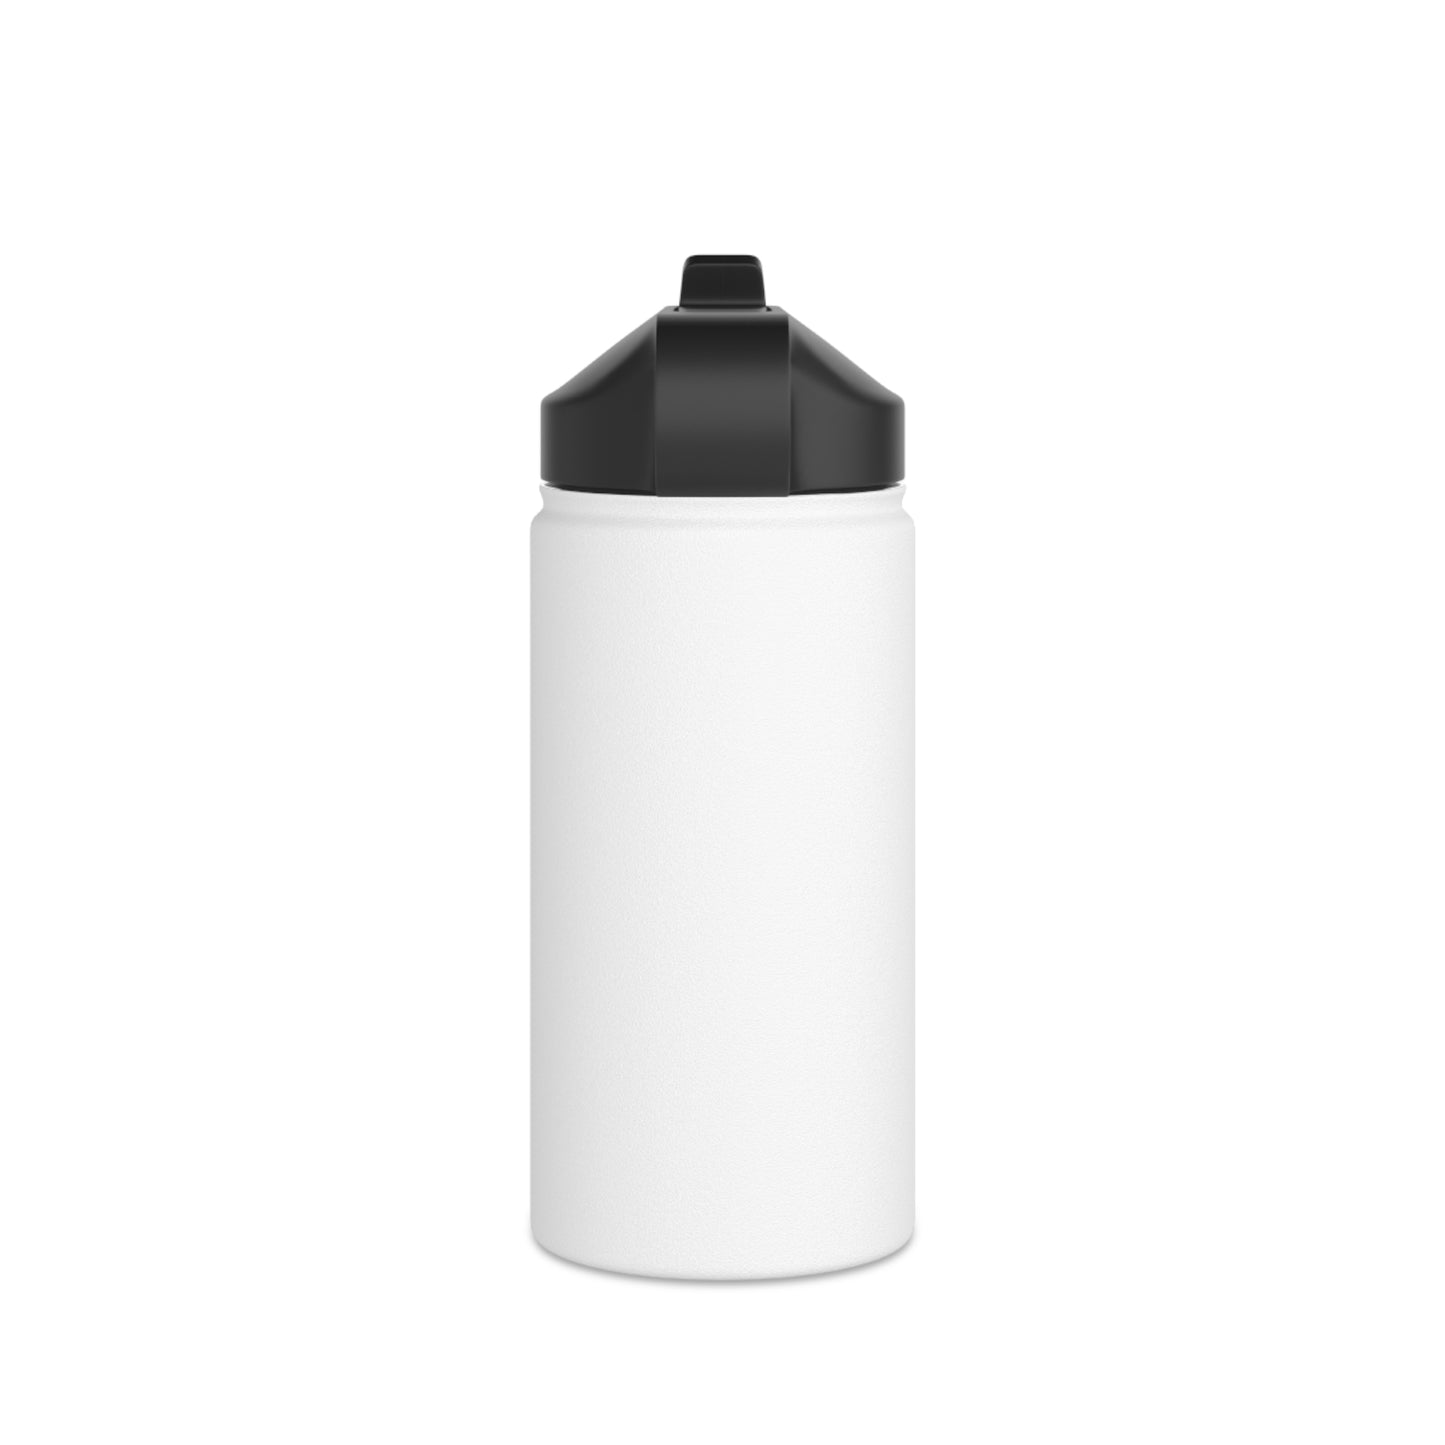 Flame (မီးတောက်) Stainless Steel Water Bottle